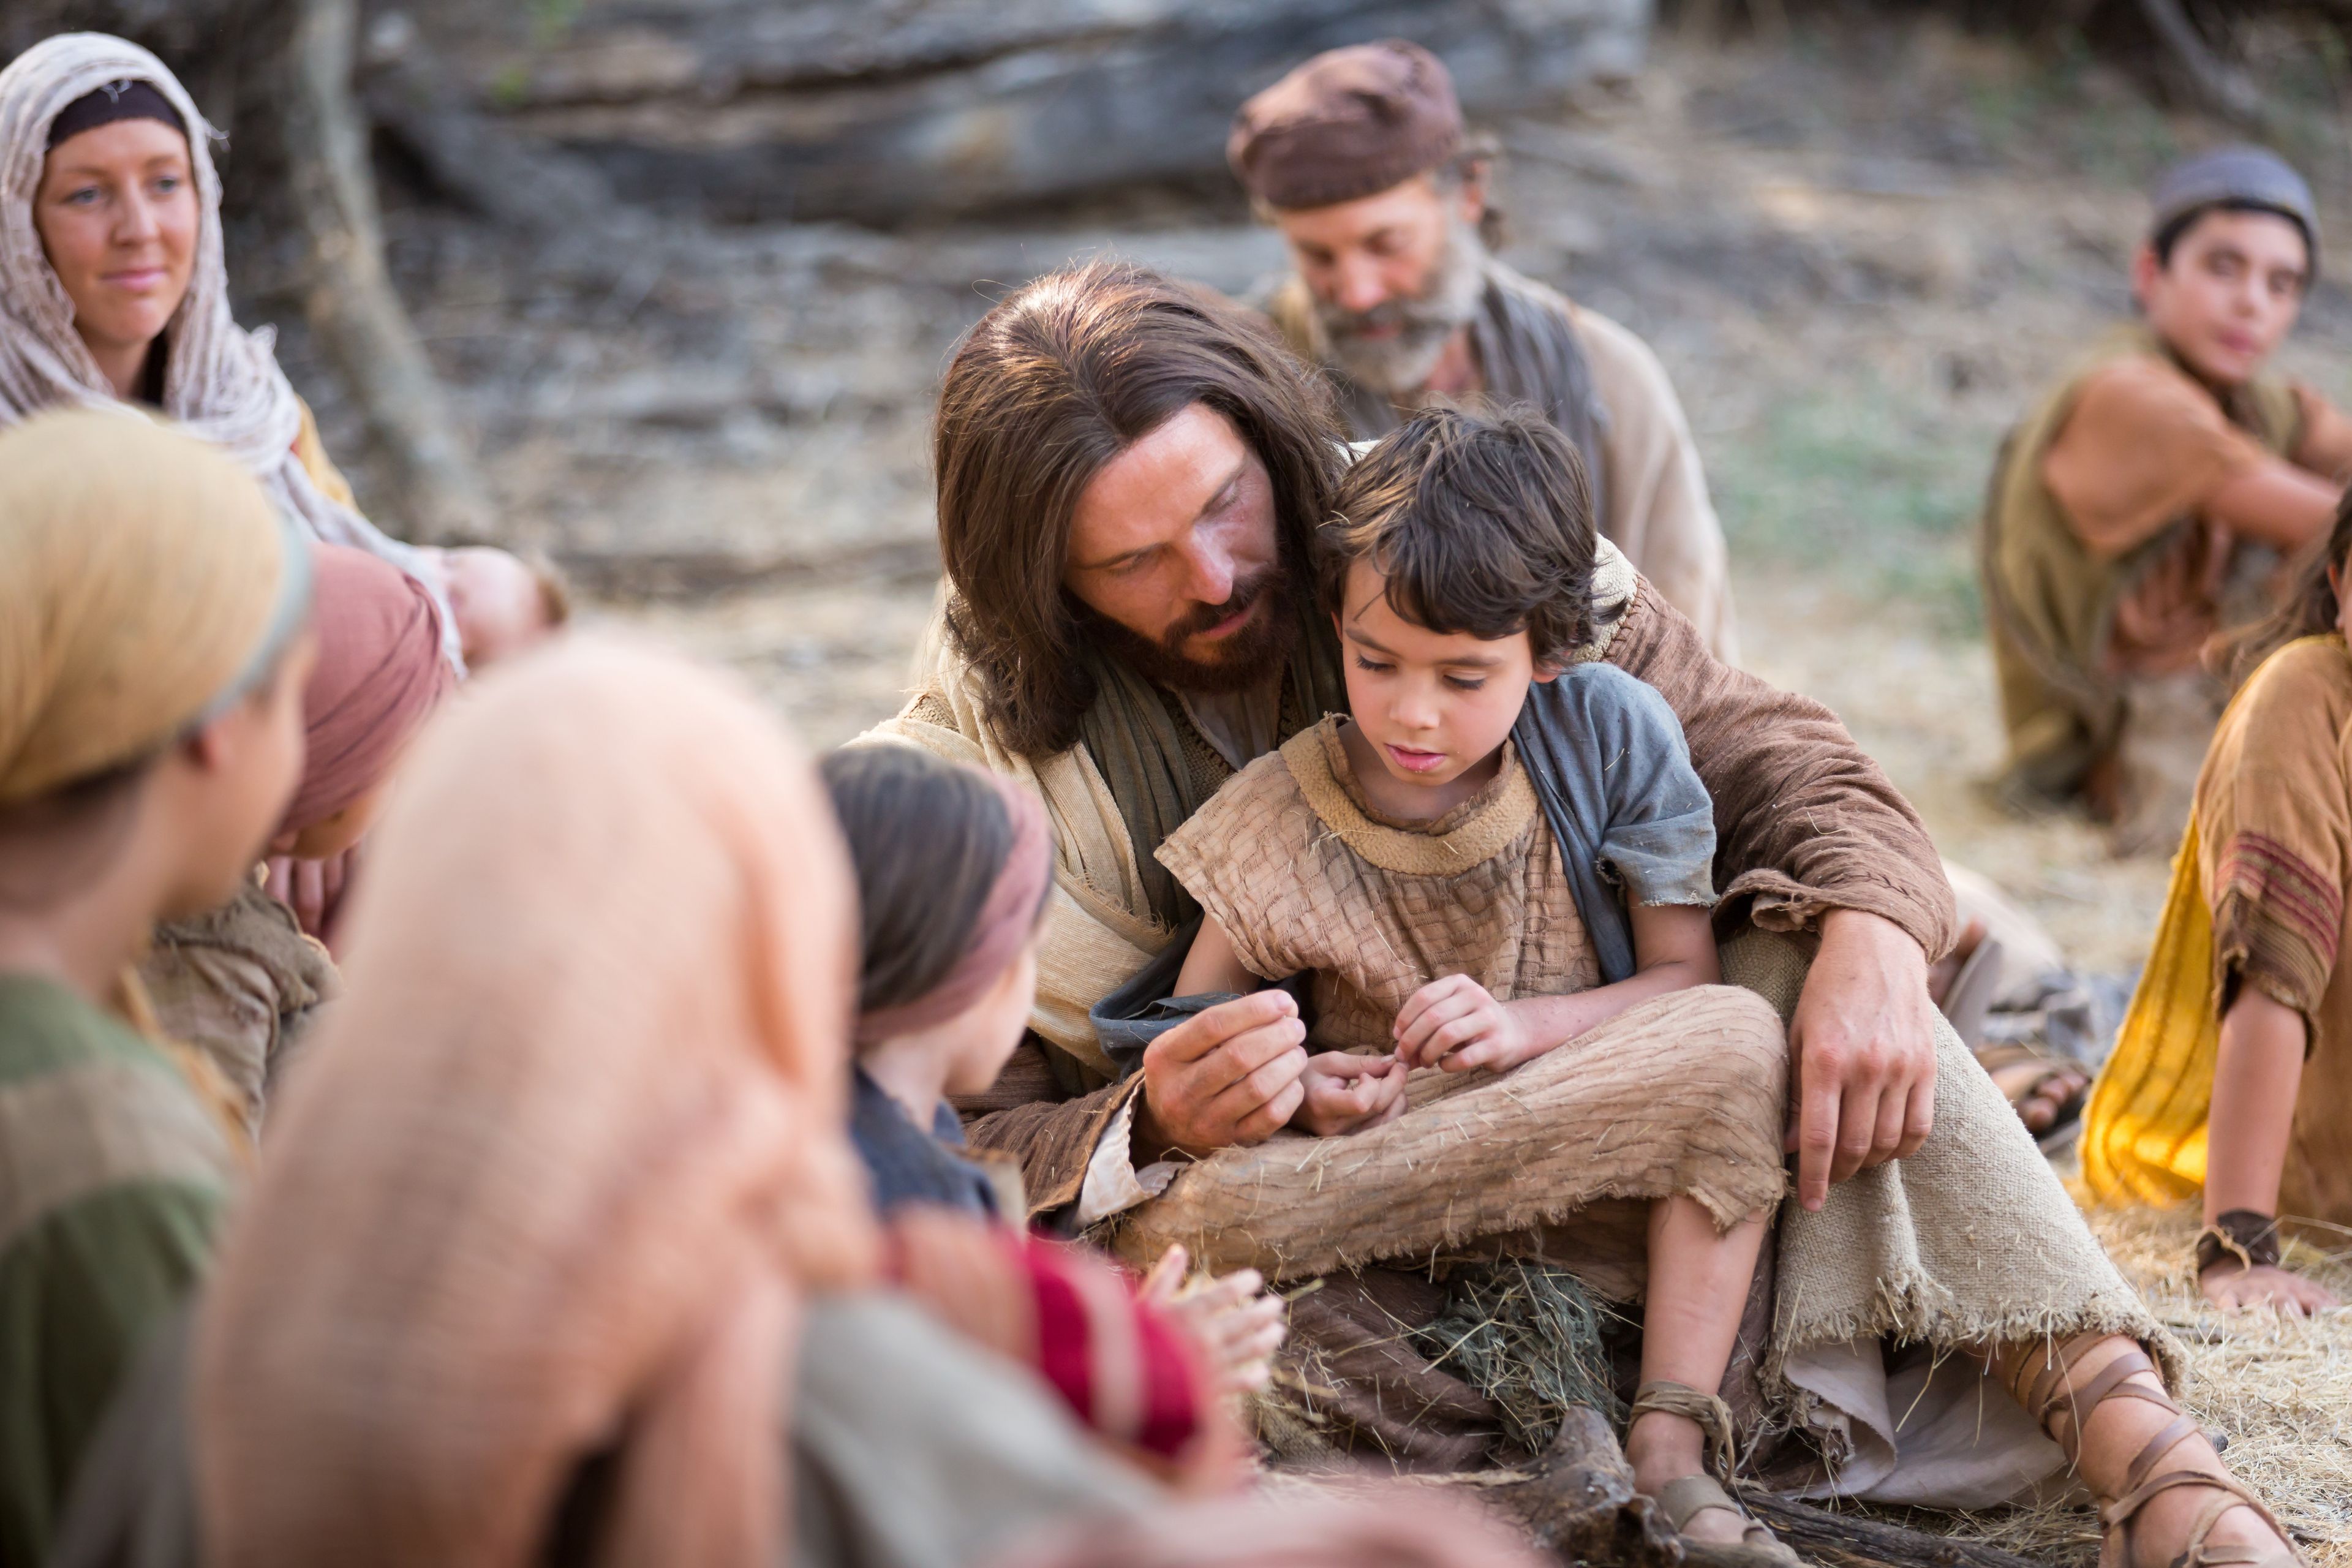 Jesus sits with a young child after telling His Apostles, “Suffer little children to come unto me.”